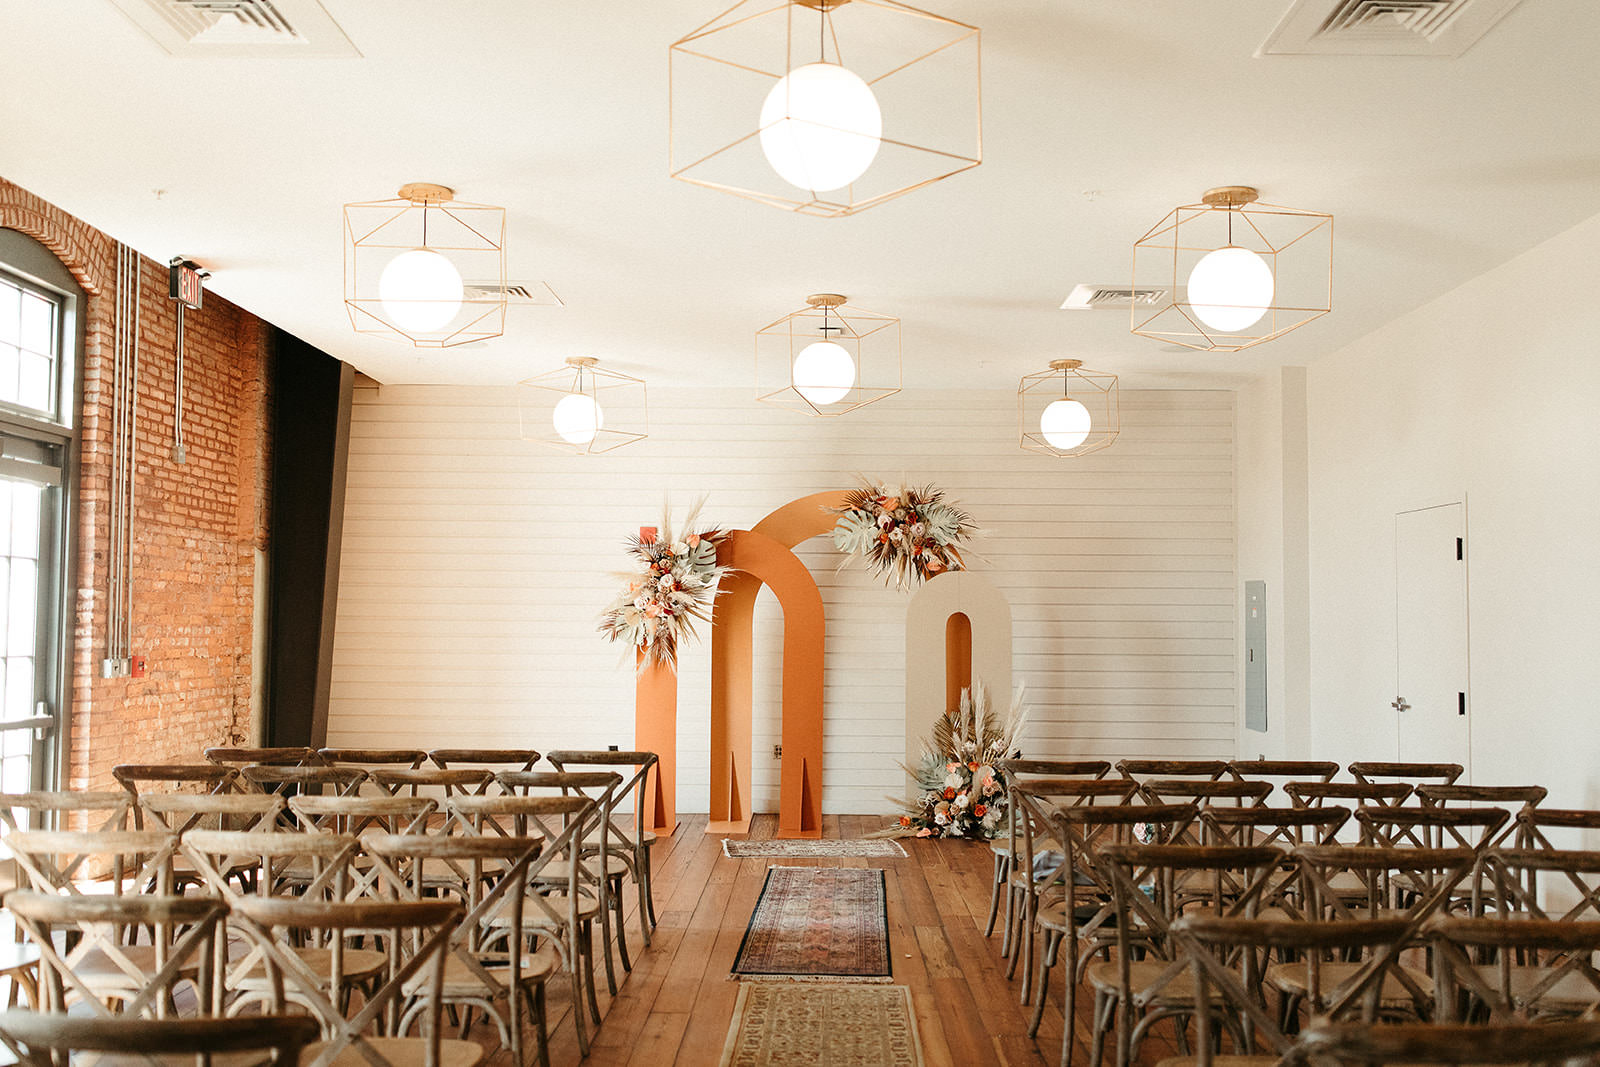 Earthy Neutral Boho Modern Chic Wedding Ceremony Decor, Wooden Cross Back Chairs, Arched Panels in Cream and Terracotta with Lush Floral Bouquets | Tampa Bay Wedding Planner Wilder Mind Events | Wedding Florist Save the Date Florida | Tampa Wedding Venue Armature Works